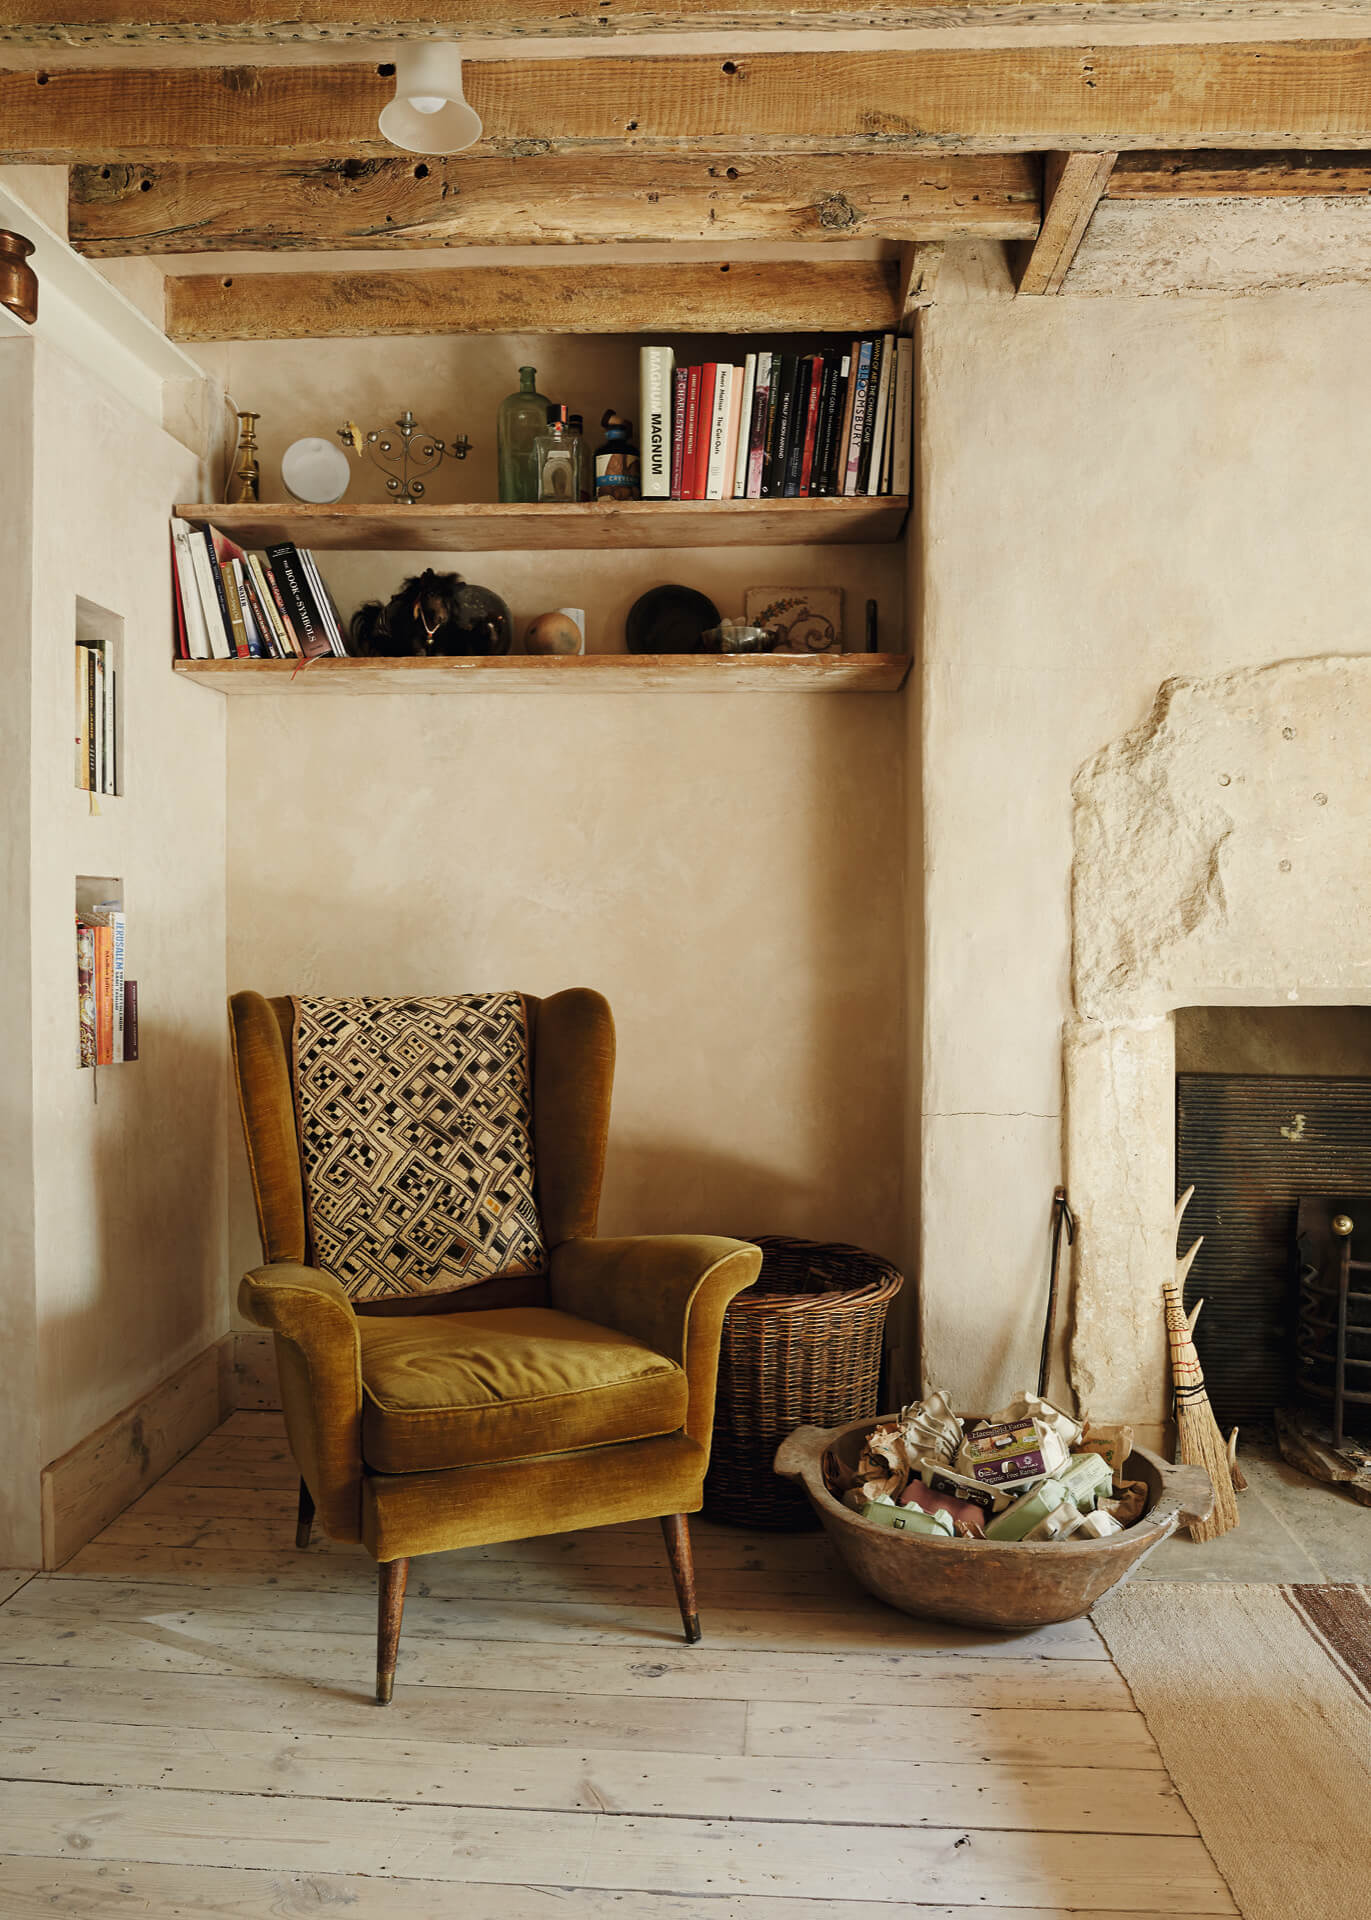 Rustic interior featured in Poetry of Spaces by Sarah Andrews